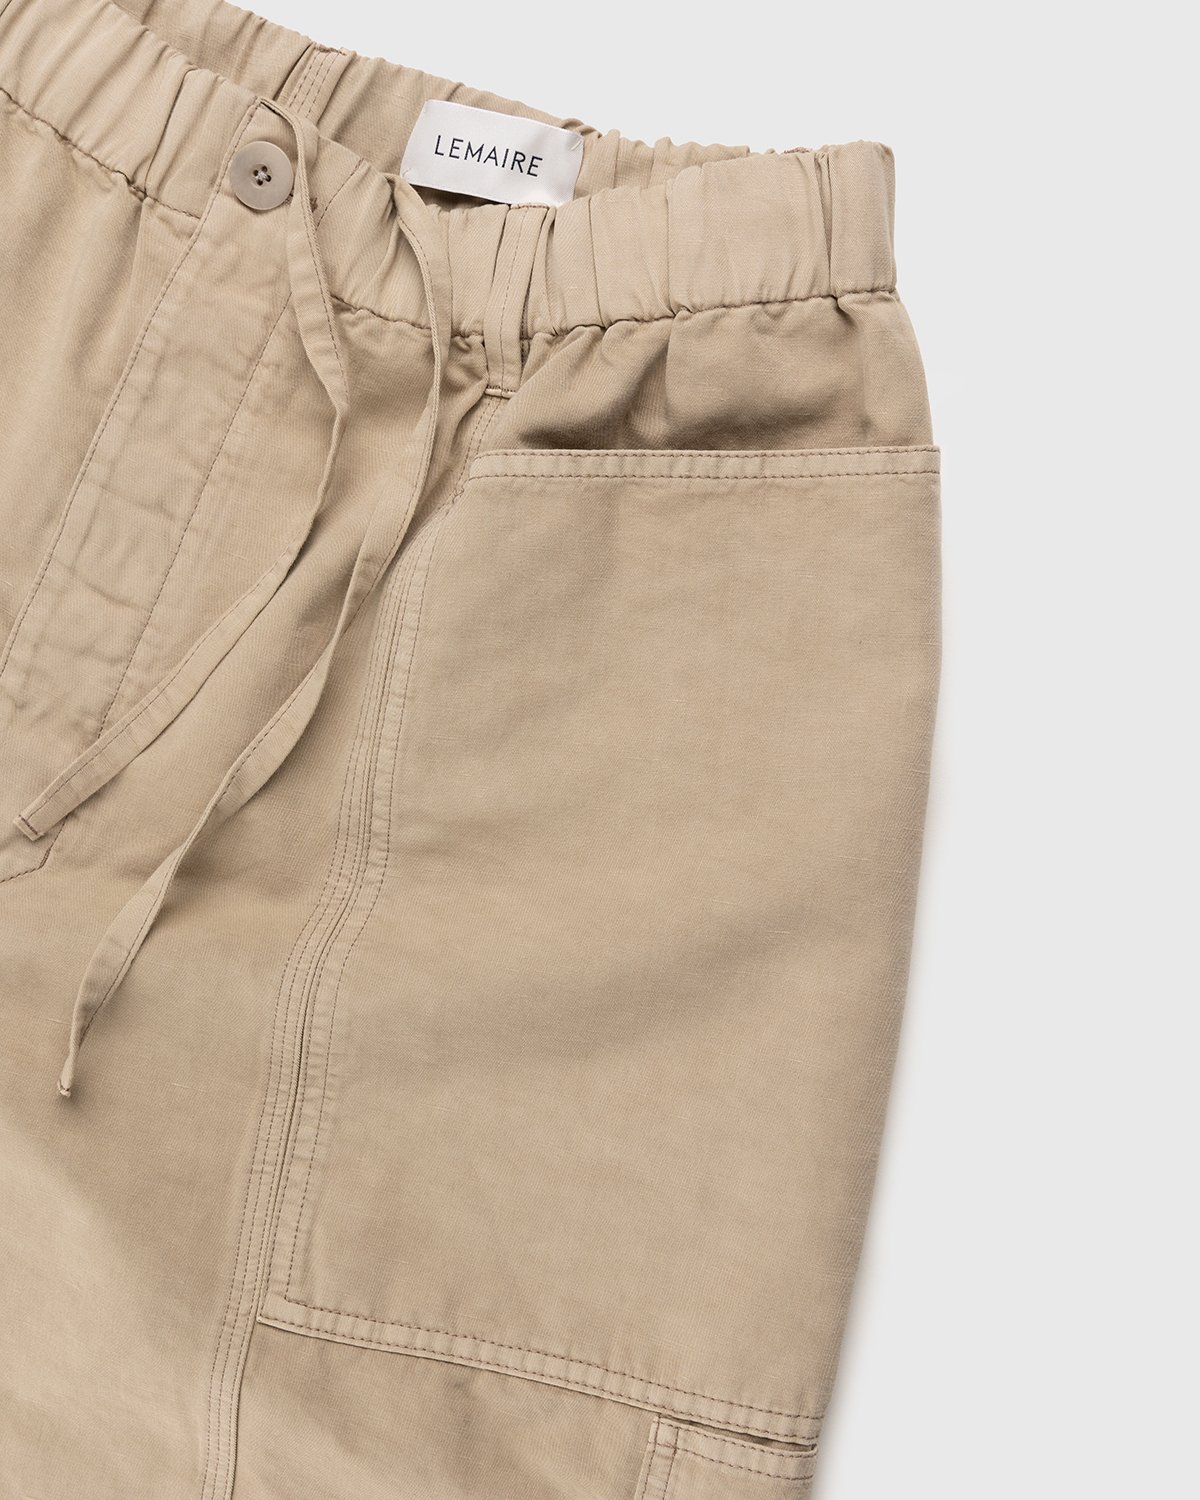 Lemaire - Fatigue Pants Natural Beige - Clothing - Beige - Image 4